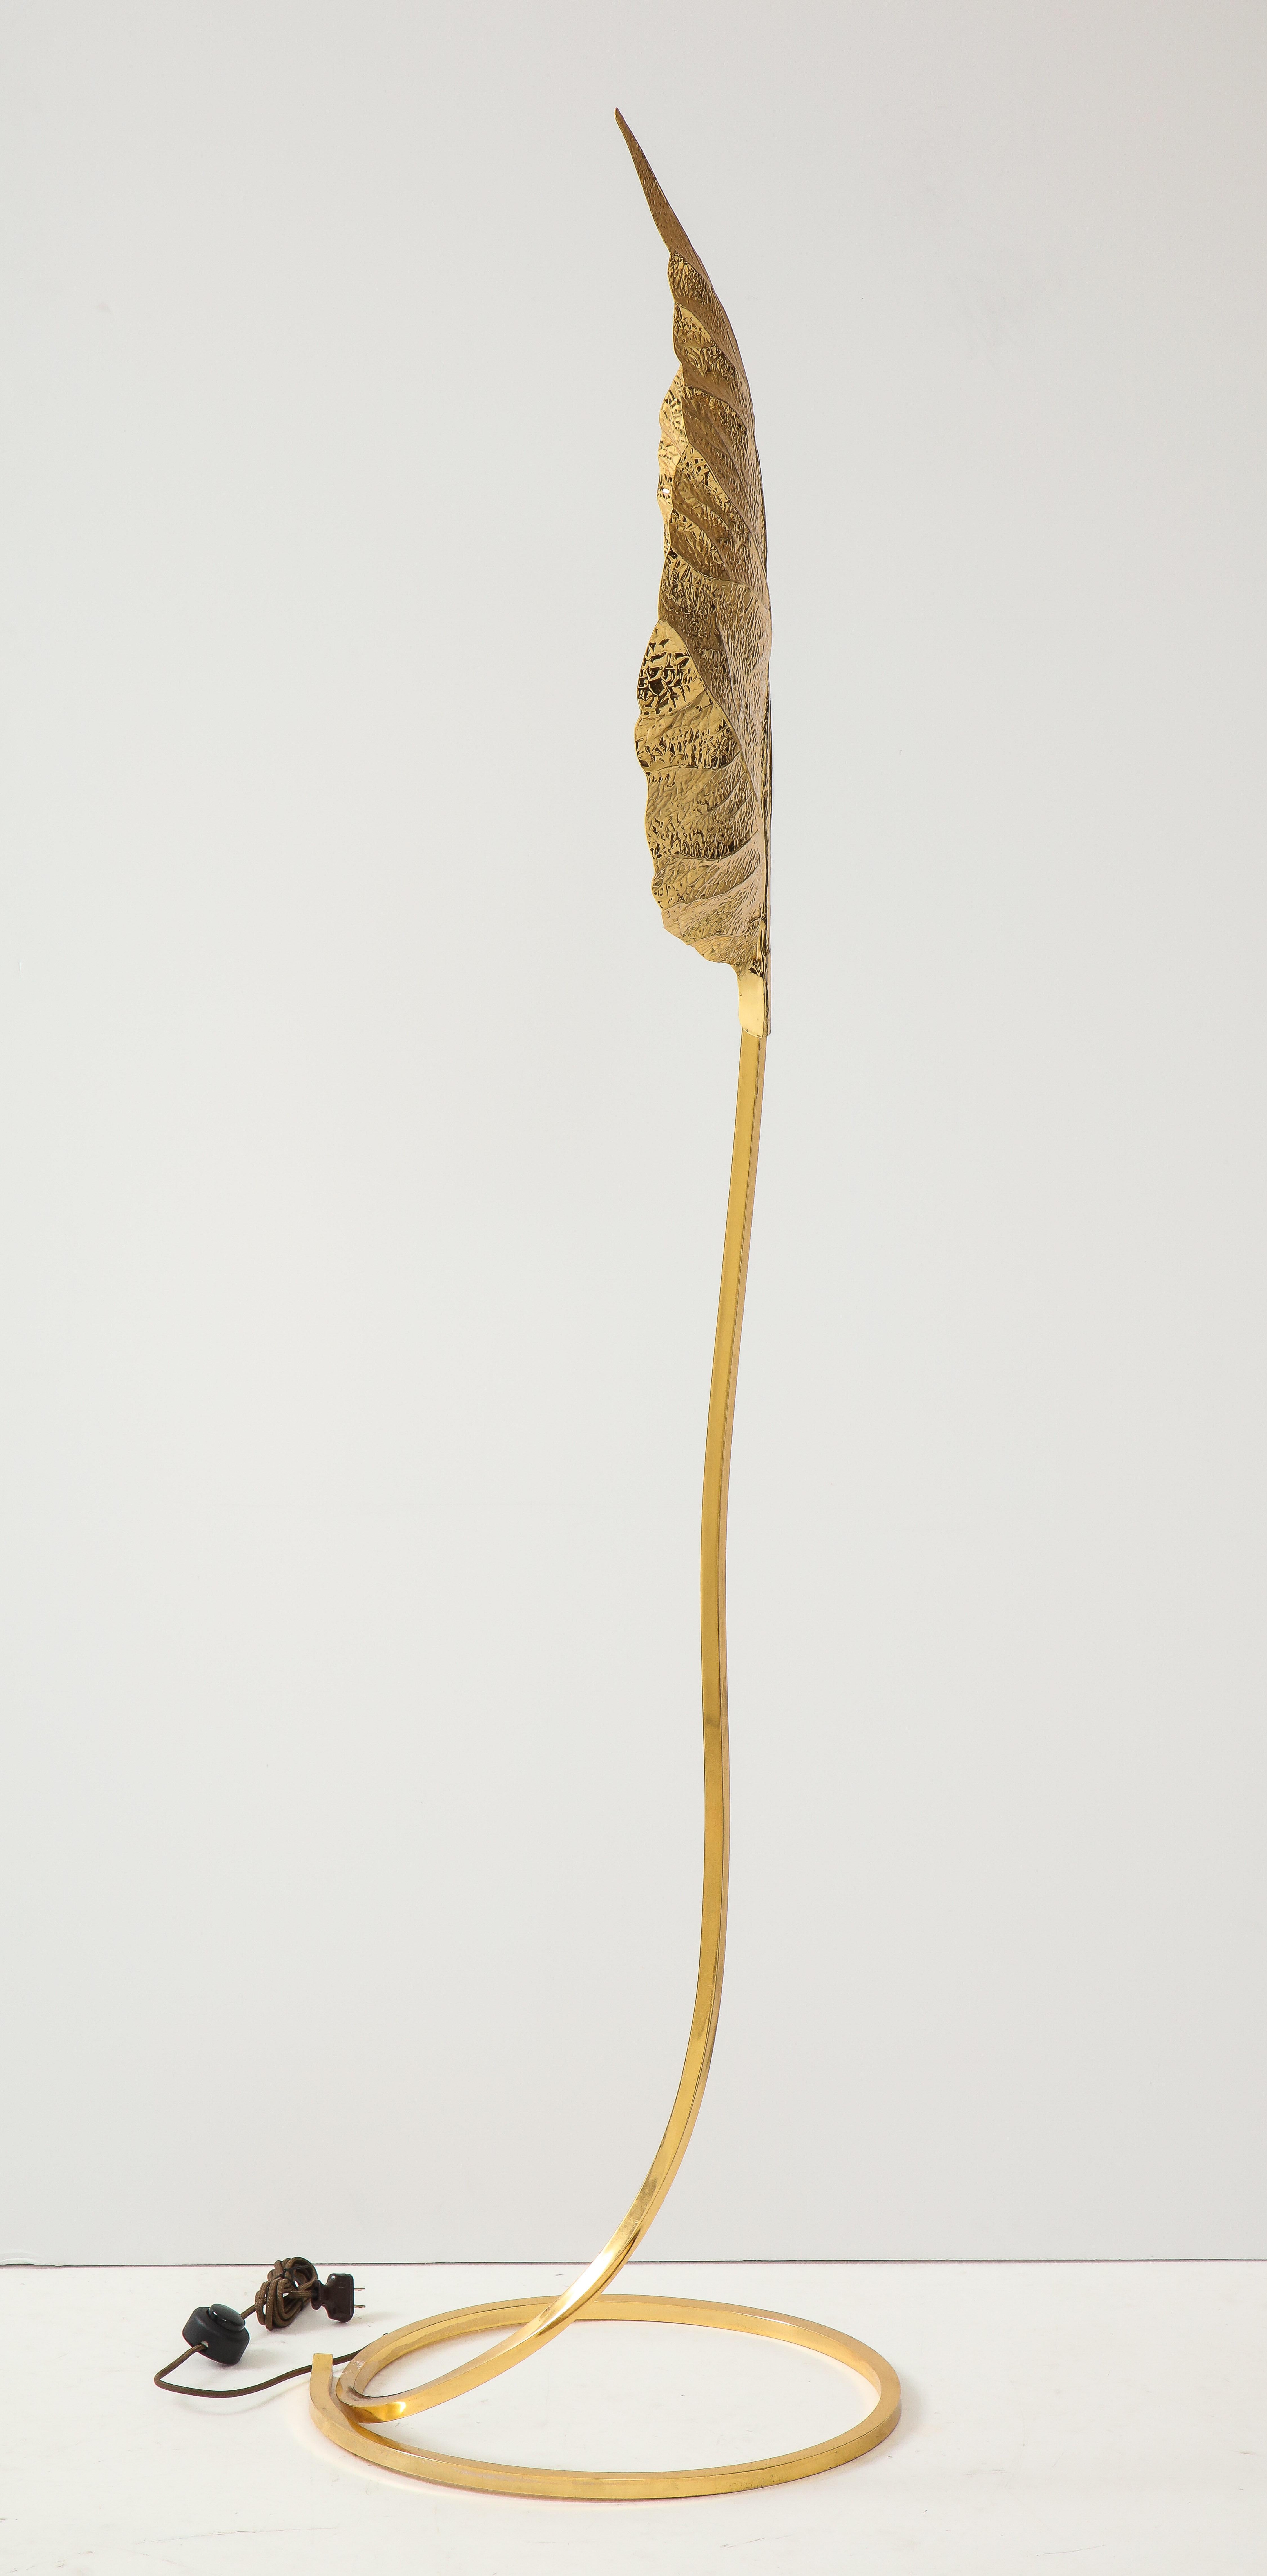 Elegant brass rhubarb leaf floor lamp with embossed leaf handmade using repoussé and chasing techniques, mounted on stem ending on circular base, Italy, 1990s.
Rewired to U.S. standards.